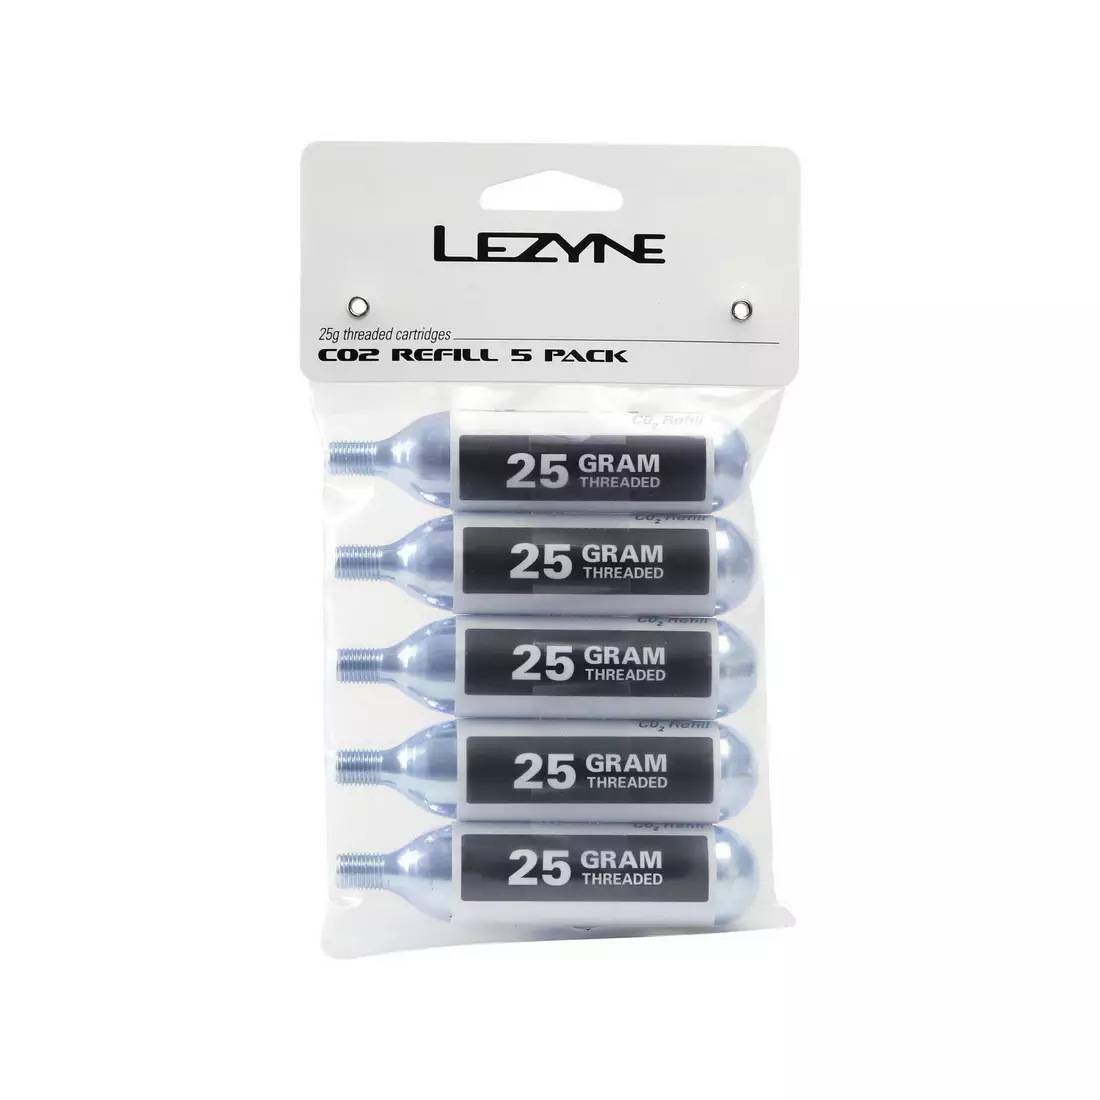 LEZYNE gas cartridge for bicycle pump threaded co2 25g 5 pieces LZN-1-C2-CRTDG-V125P5